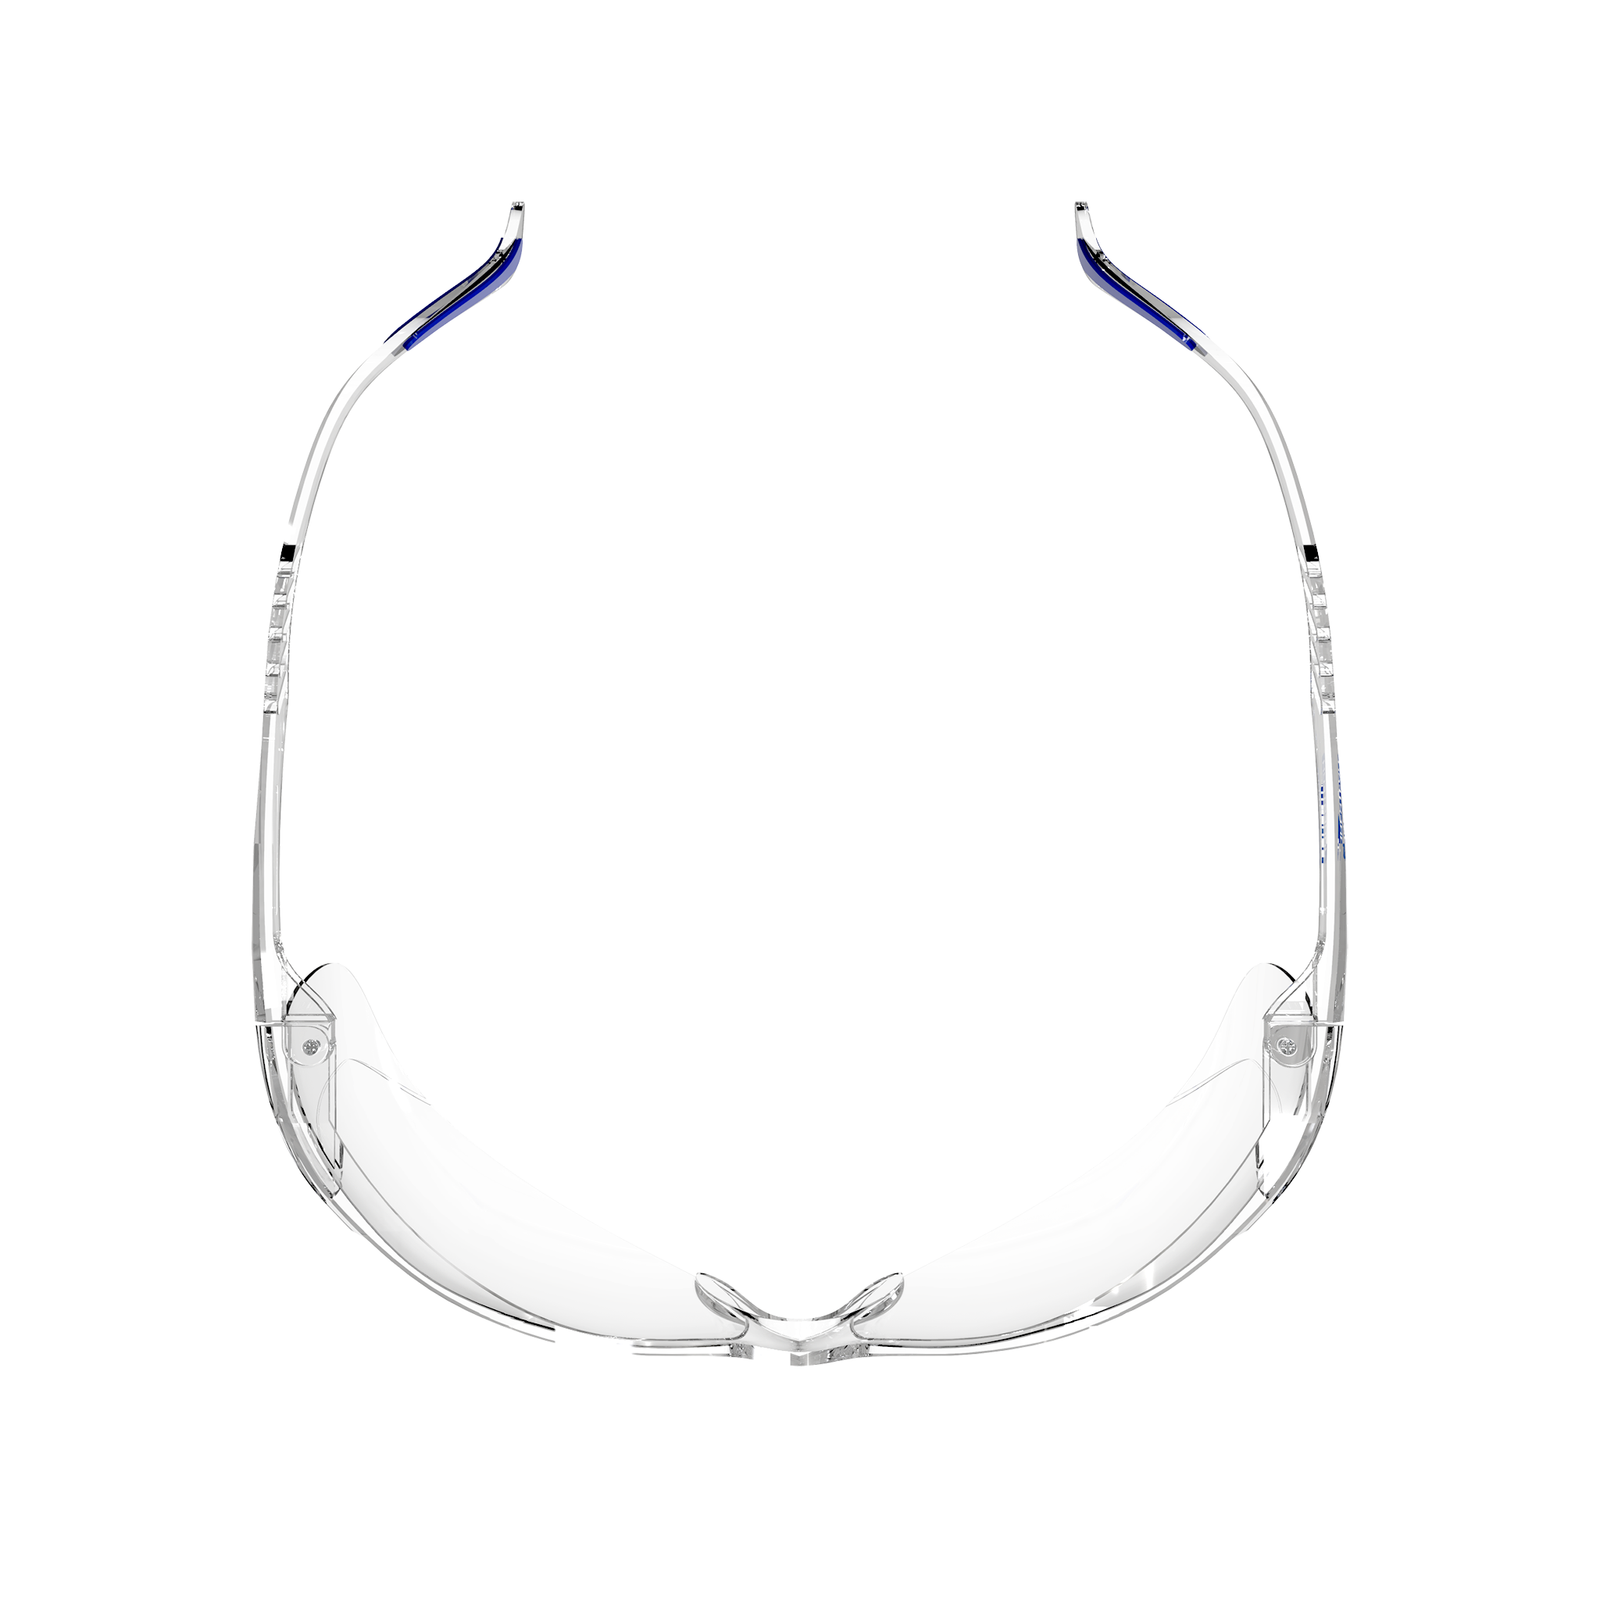 Top view of the clear JORESTECH panoramic safety glass for high impact protection.  Temples of this ANSI compliant glasses have details in blue.